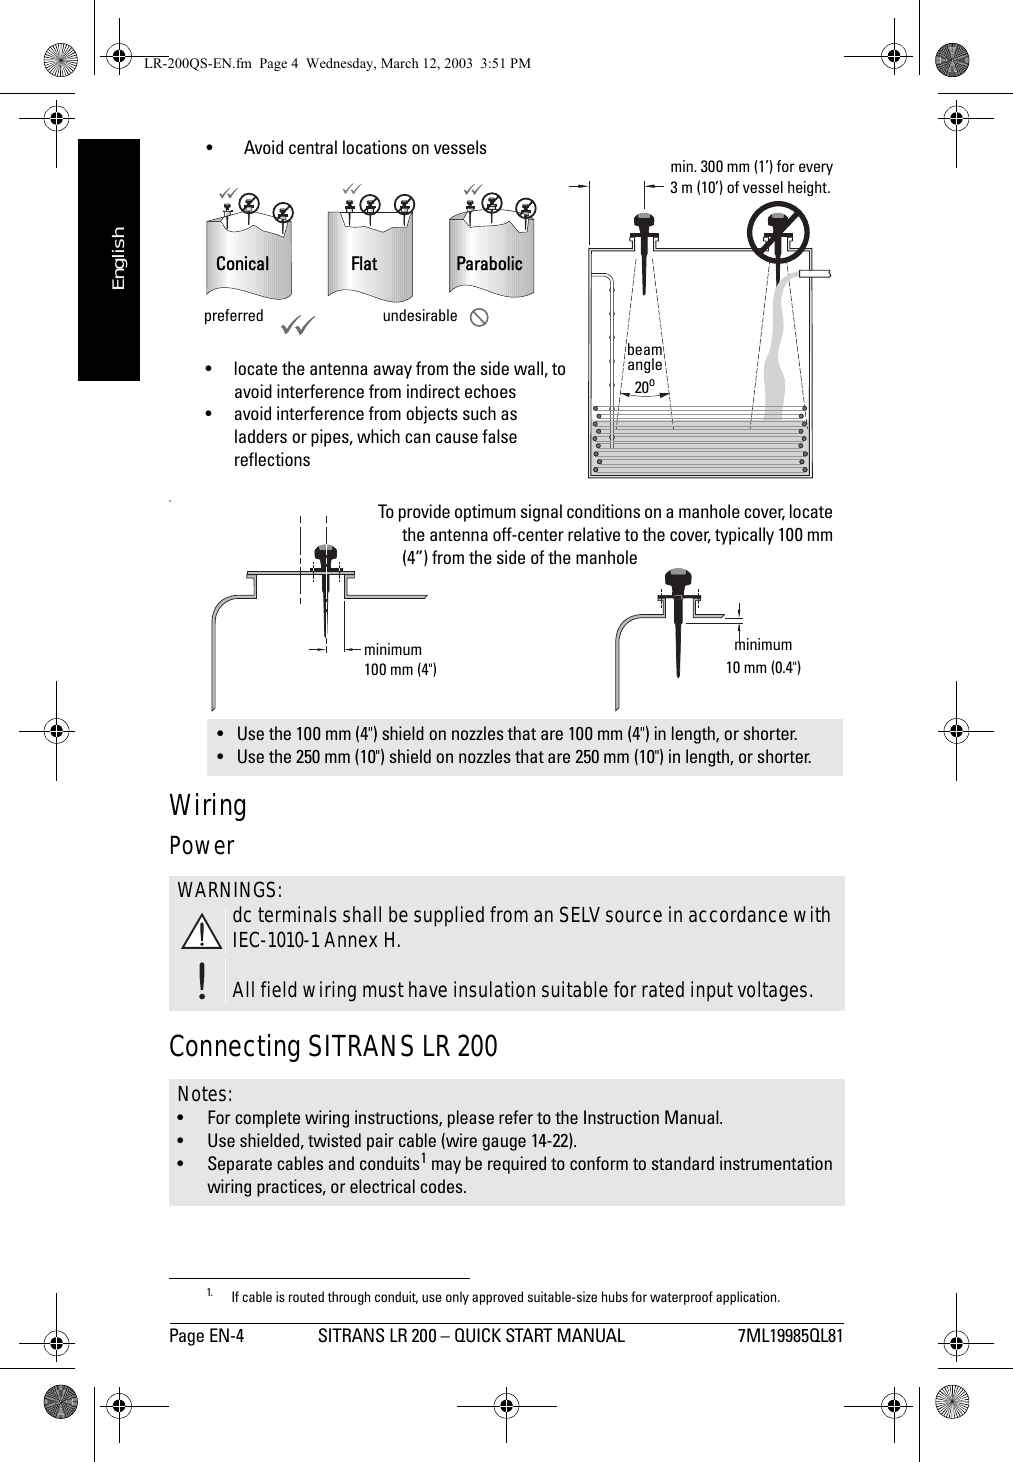 Page EN-4 SITRANS LR 200 – QUICK START MANUAL 7ML19985QL81mmmmmEnglish• Avoid central locations on vesselss.WiringPower Connecting SITRANS LR 2001• Use the 100 mm (4&quot;) shield on nozzles that are 100 mm (4&quot;) in length, or shorter.• Use the 250 mm (10&quot;) shield on nozzles that are 250 mm (10&quot;) in length, or shorter.WARNINGS:dc terminals shall be supplied from an SELV source in accordance with IEC-1010-1 Annex H.All field wiring must have insulation suitable for rated input voltages.Notes: • For complete wiring instructions, please refer to the Instruction Manual.• Use shielded, twisted pair cable (wire gauge 14-22).• Separate cables and conduits1 may be required to conform to standard instrumentation wiring practices, or electrical codes. 1. If cable is routed through conduit, use only approved suitable-size hubs for waterproof application.preferred undesirableConiFl at Flat  Parabolic Conicalmin. 300 mm (1’) for every 3 m (10’) of vessel height.beam angle20o• locate the antenna away from the side wall, to avoid interference from indirect echoes• avoid interference from objects such as ladders or pipes, which can cause false reflectionsminimum 100 mm (4&quot;)To provide optimum signal conditions on a manhole cover, locate the antenna off-center relative to the cover, typically 100 mm (4”) from the side of the manholeminimum 10 mm (0.4&quot;)LR-200QS-EN.fm  Page 4  Wednesday, March 12, 2003  3:51 PM